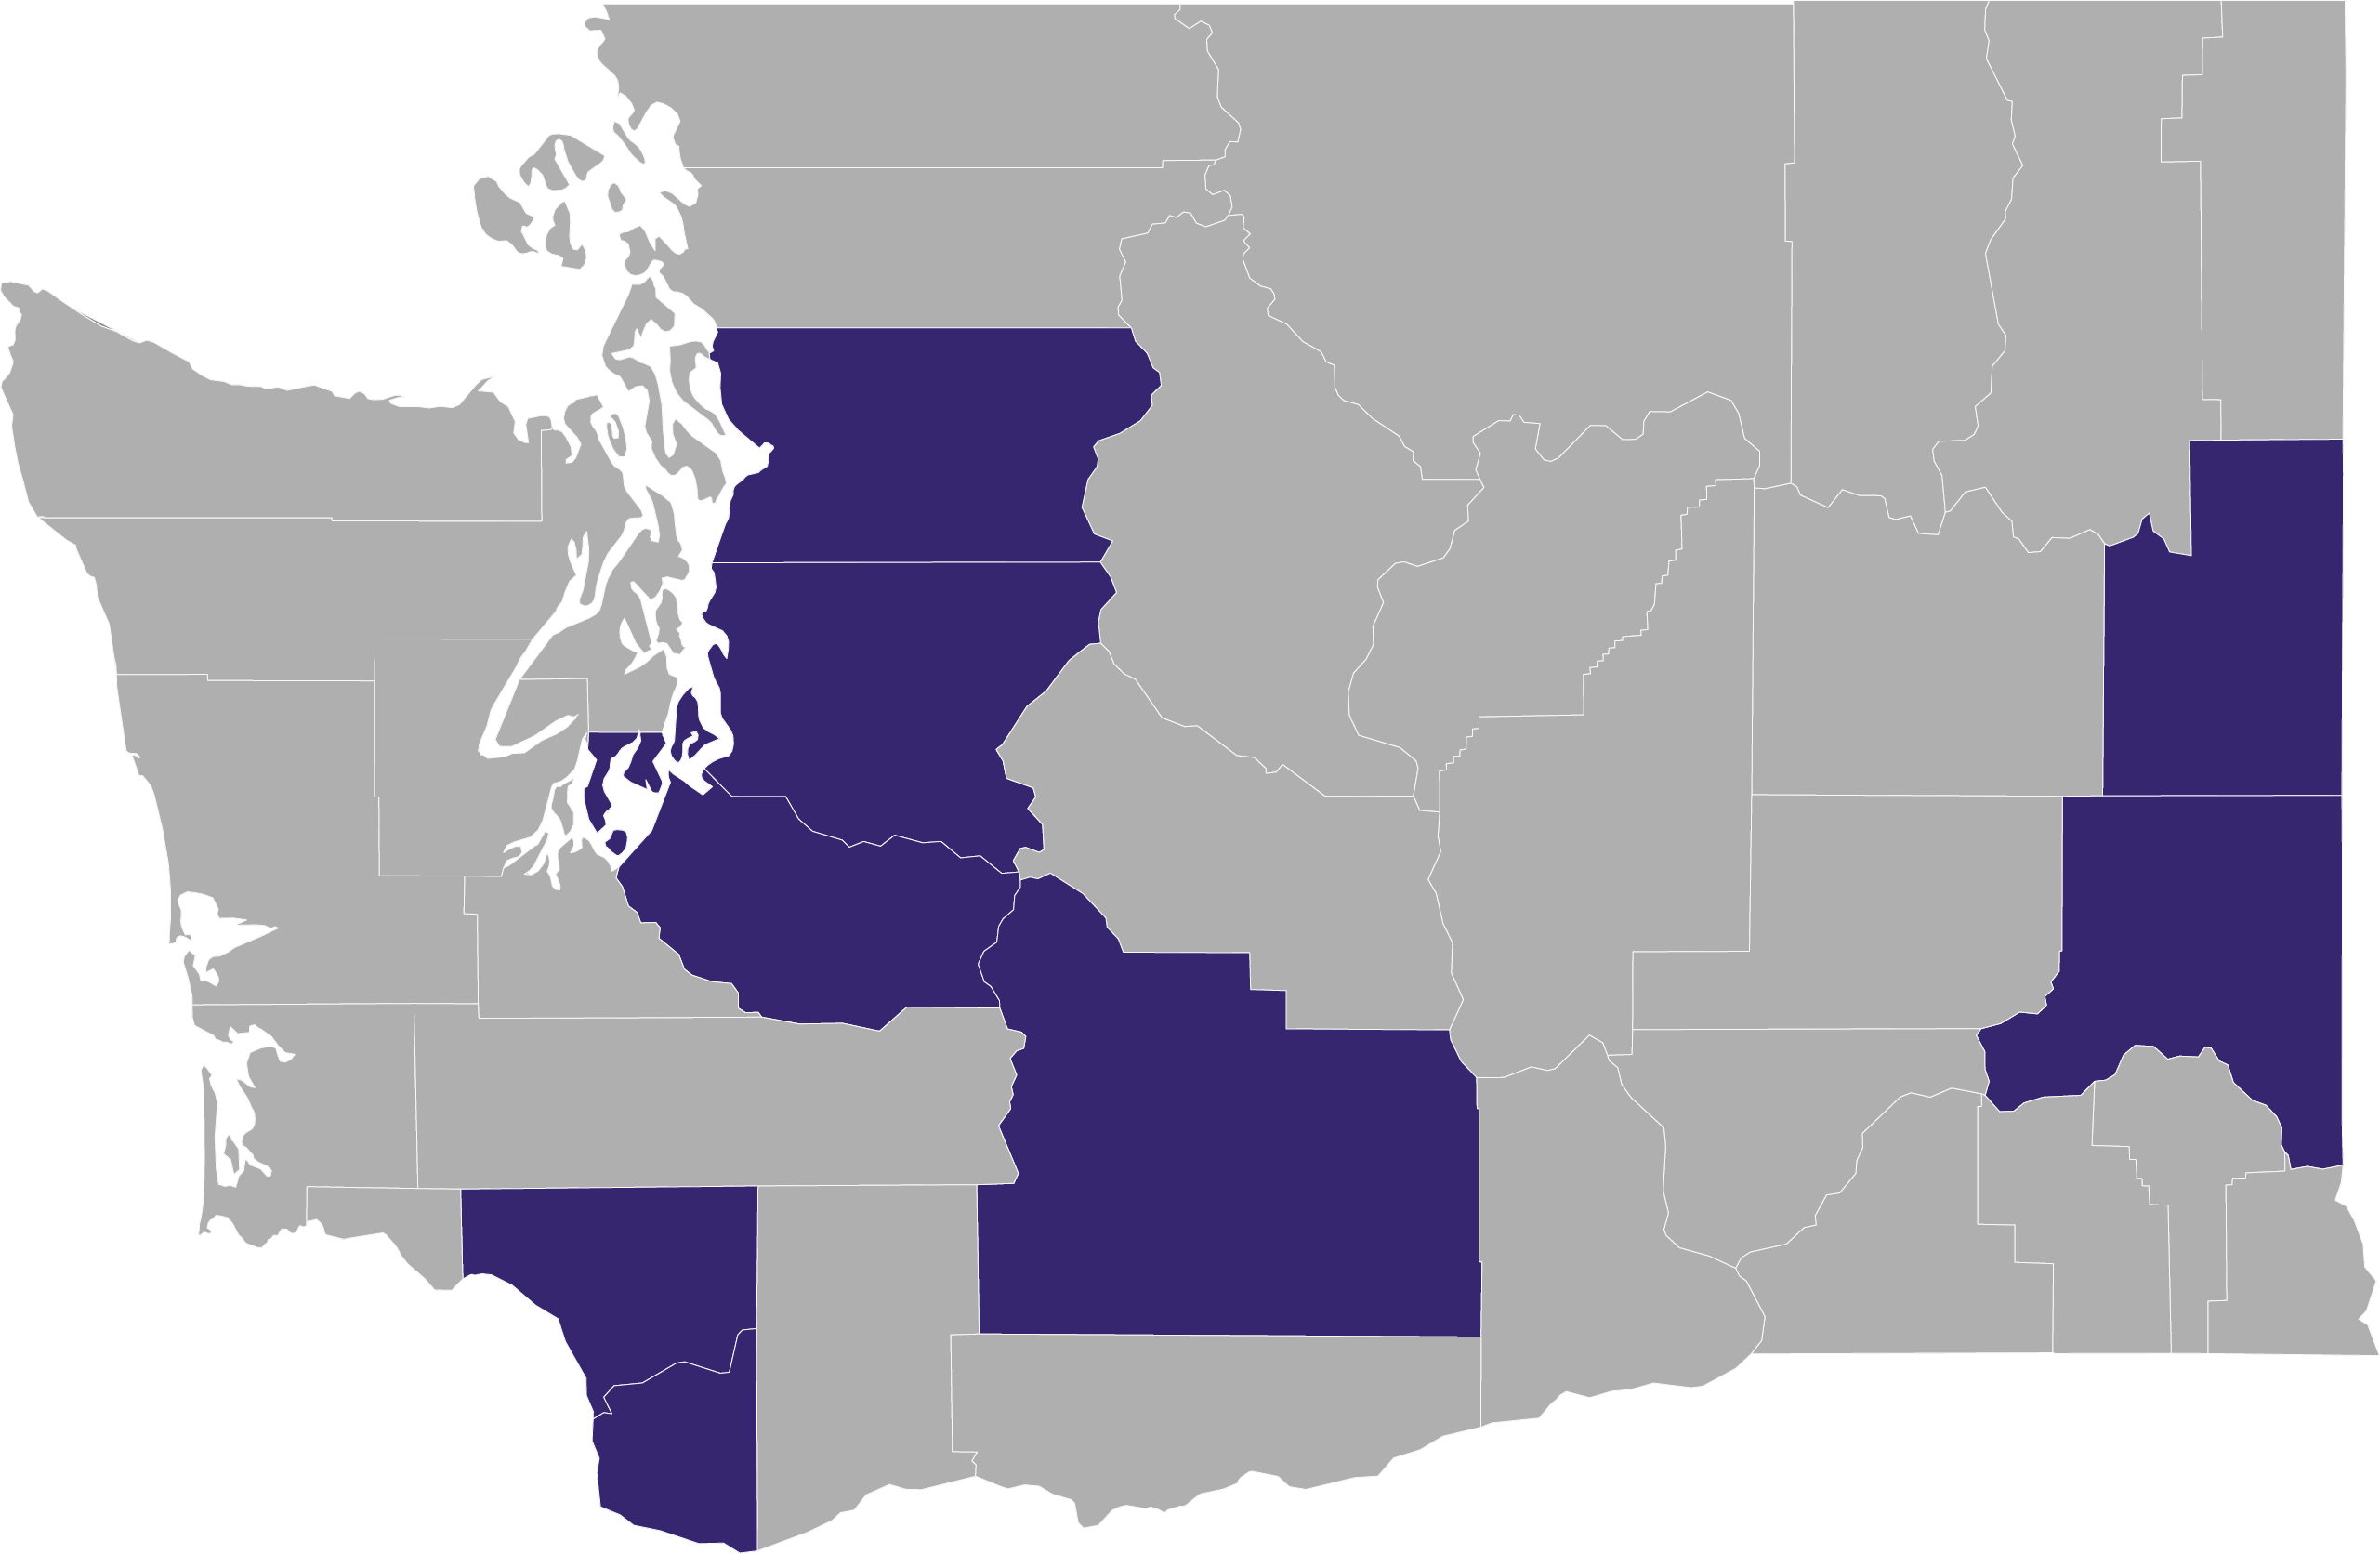 Washington state map with six counties colored in purple to represent PEARLS being there.